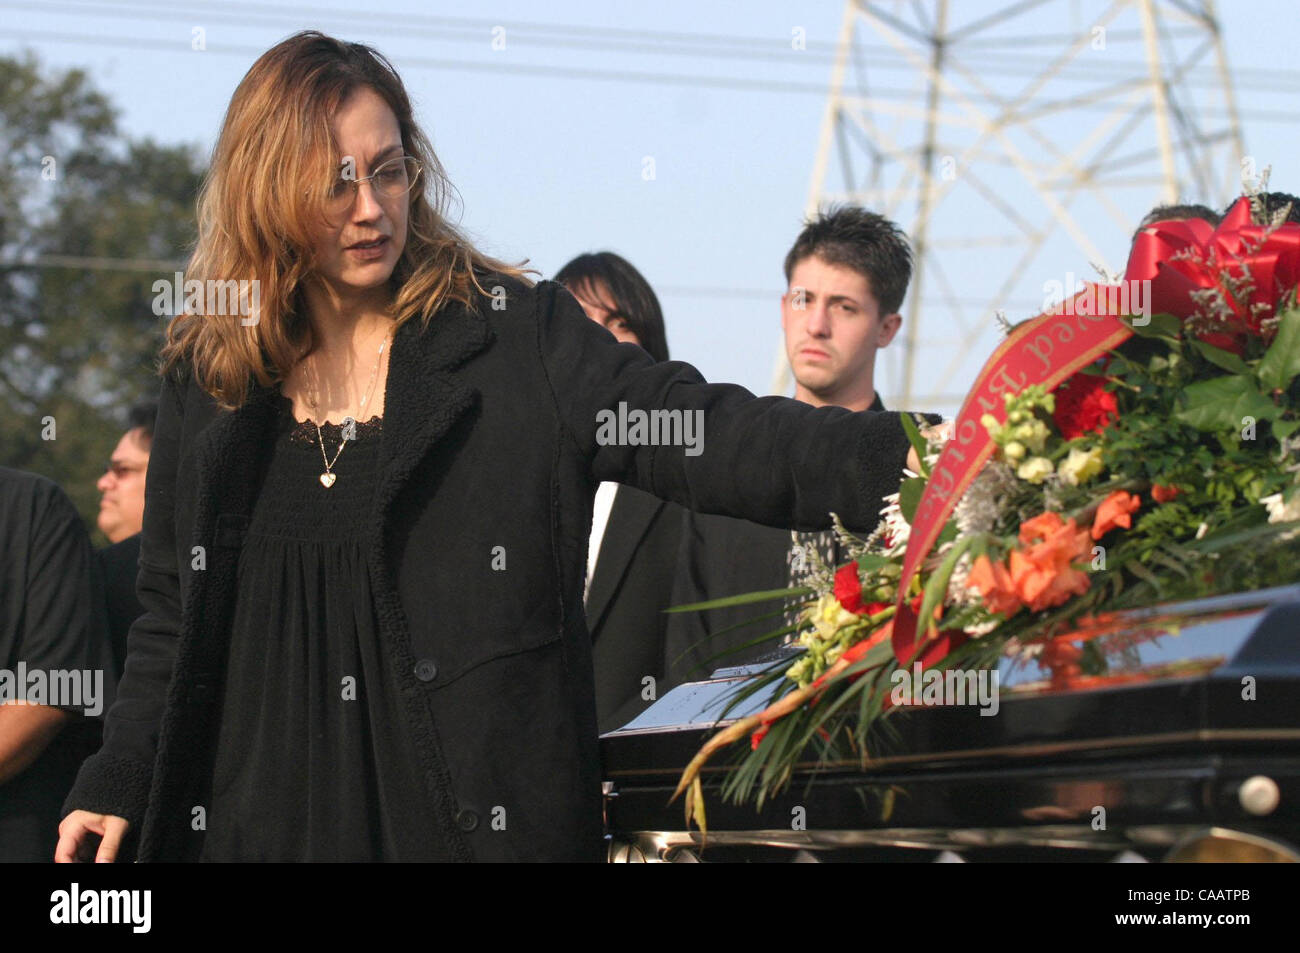 Erica Aguilar cq (left) stands near the casket of her brother Christopher Armstrong during funeral services for Christopher, who was 24 years-old, and his mother Mary Helen Armstrong at Holy Cross Cemetery in Antioch, Calif. on Thursday, January 29, 2004.  Mary, Christopher and Mary's husband Gary w Stock Photo